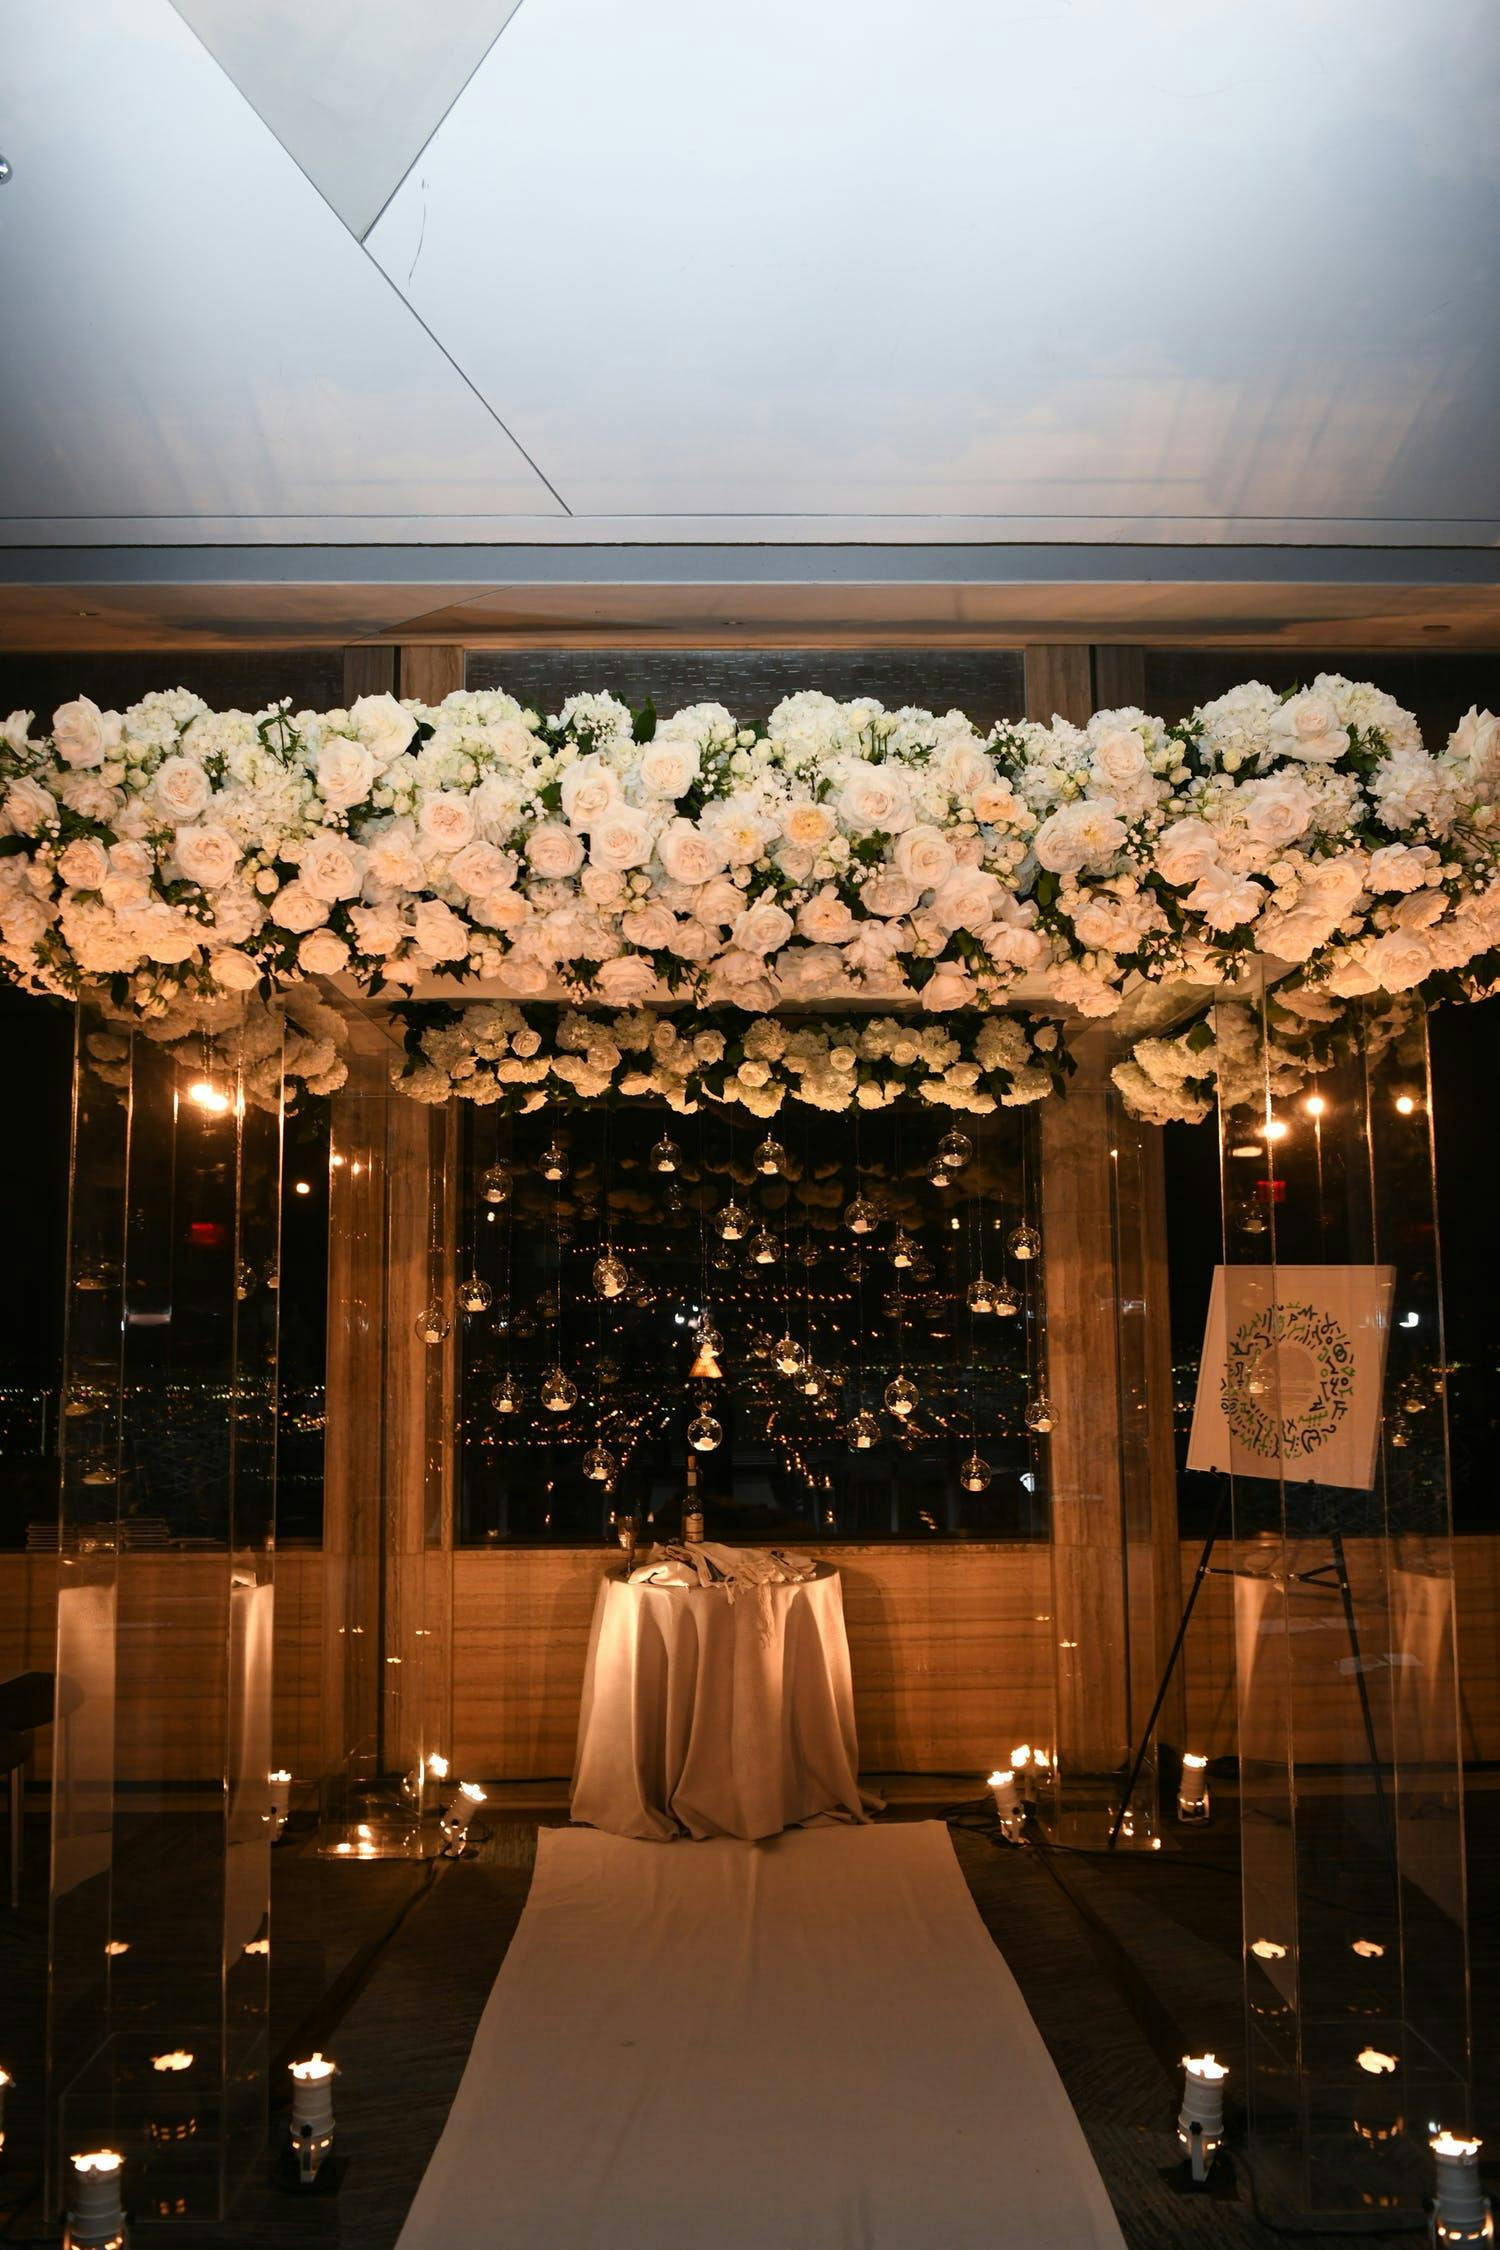 Candlelit ceremony altar with night city view in backdrop. The altar's roof is covered in clusters of white blooms intermixed with greenery.